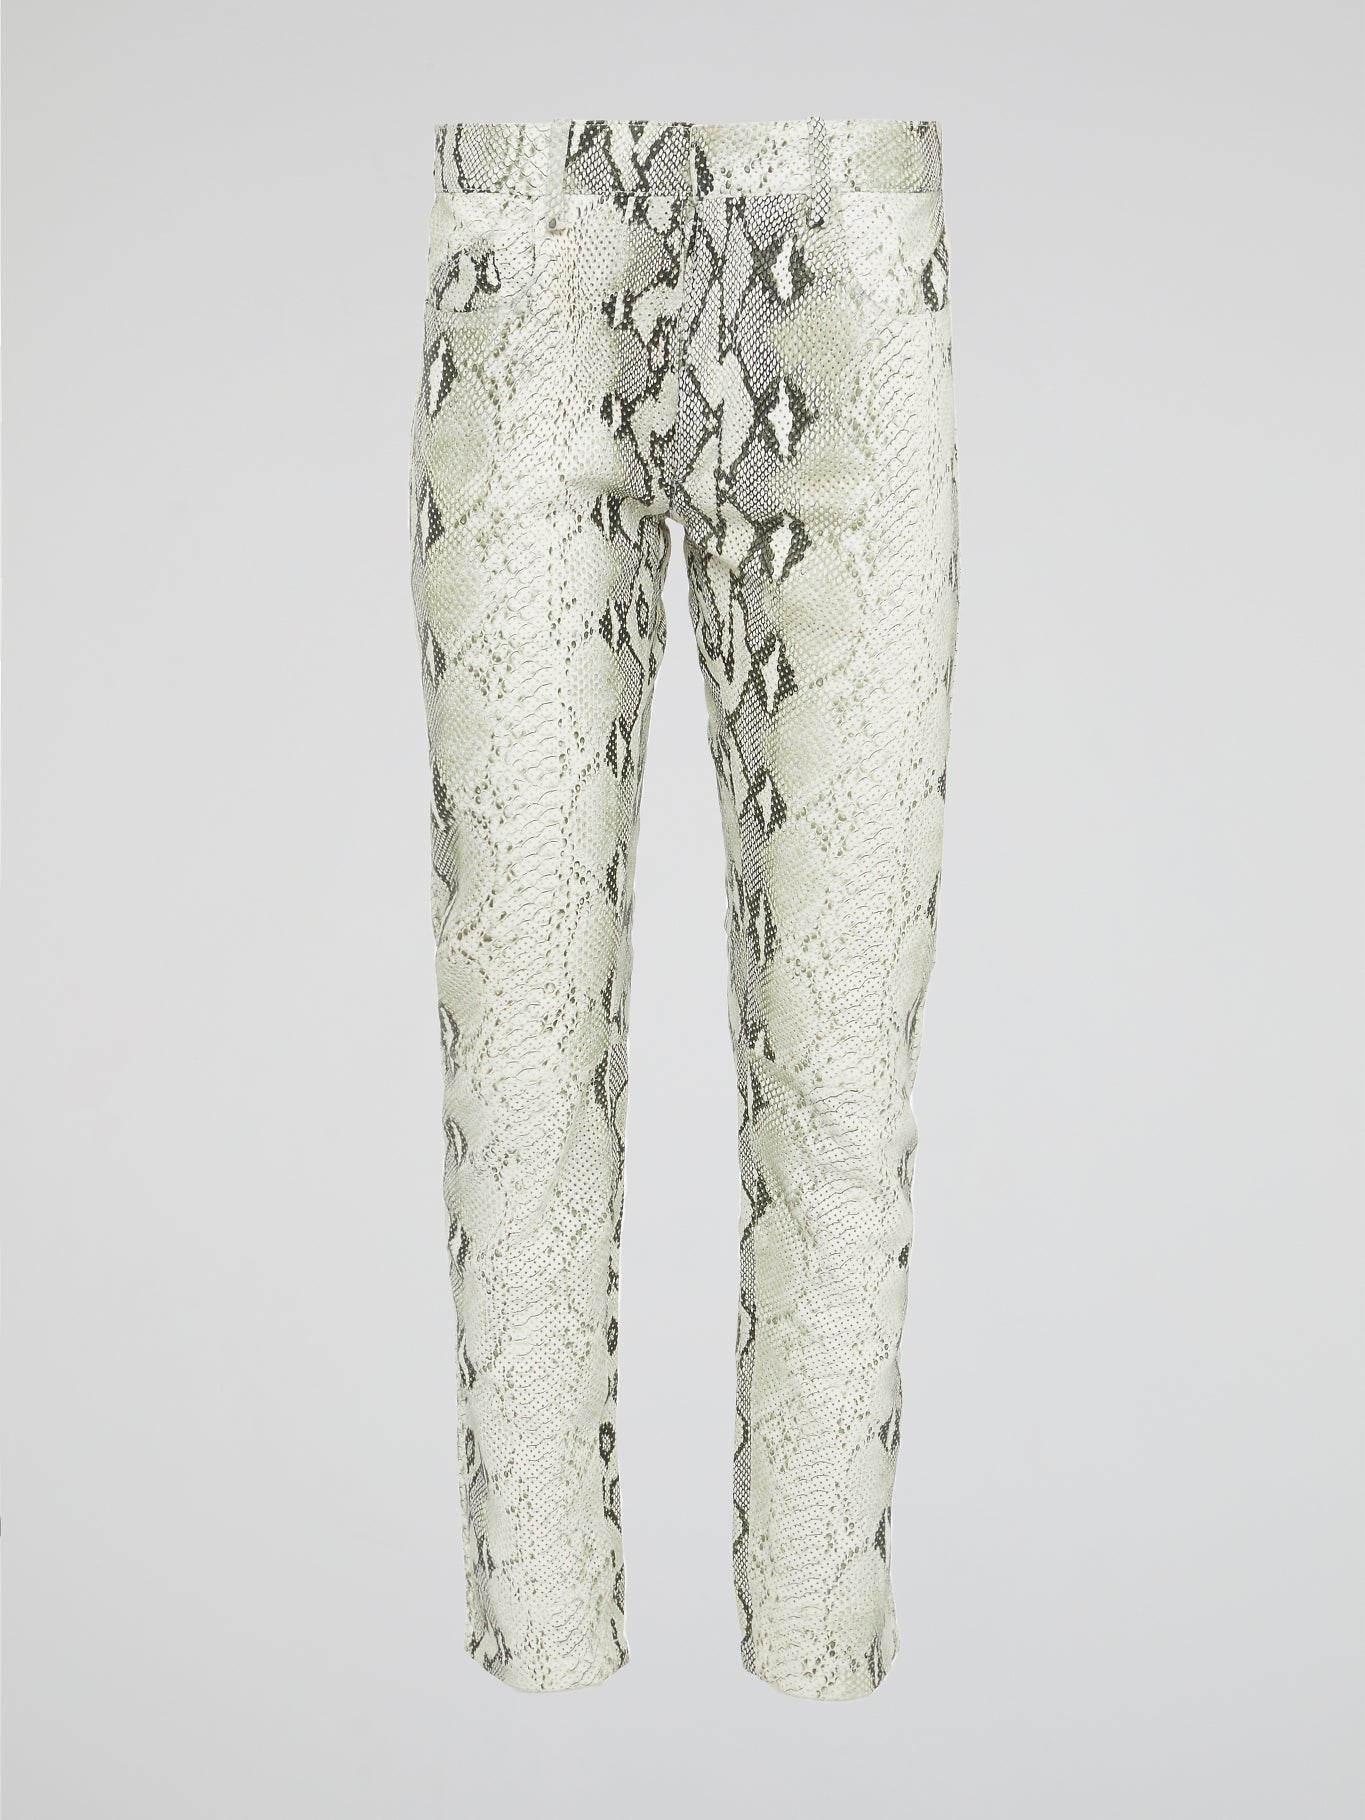 Infuse your wardrobe with a touch of wild sophistication with these snake print skinny trousers from Roberto Cavalli. Crafted from luxurious fabric, these statement pants will elevate any outfit from basic to bold in an instant. Step out in style and turn heads wherever you go with these modern, edgy trousers that exude confidence and glamour.